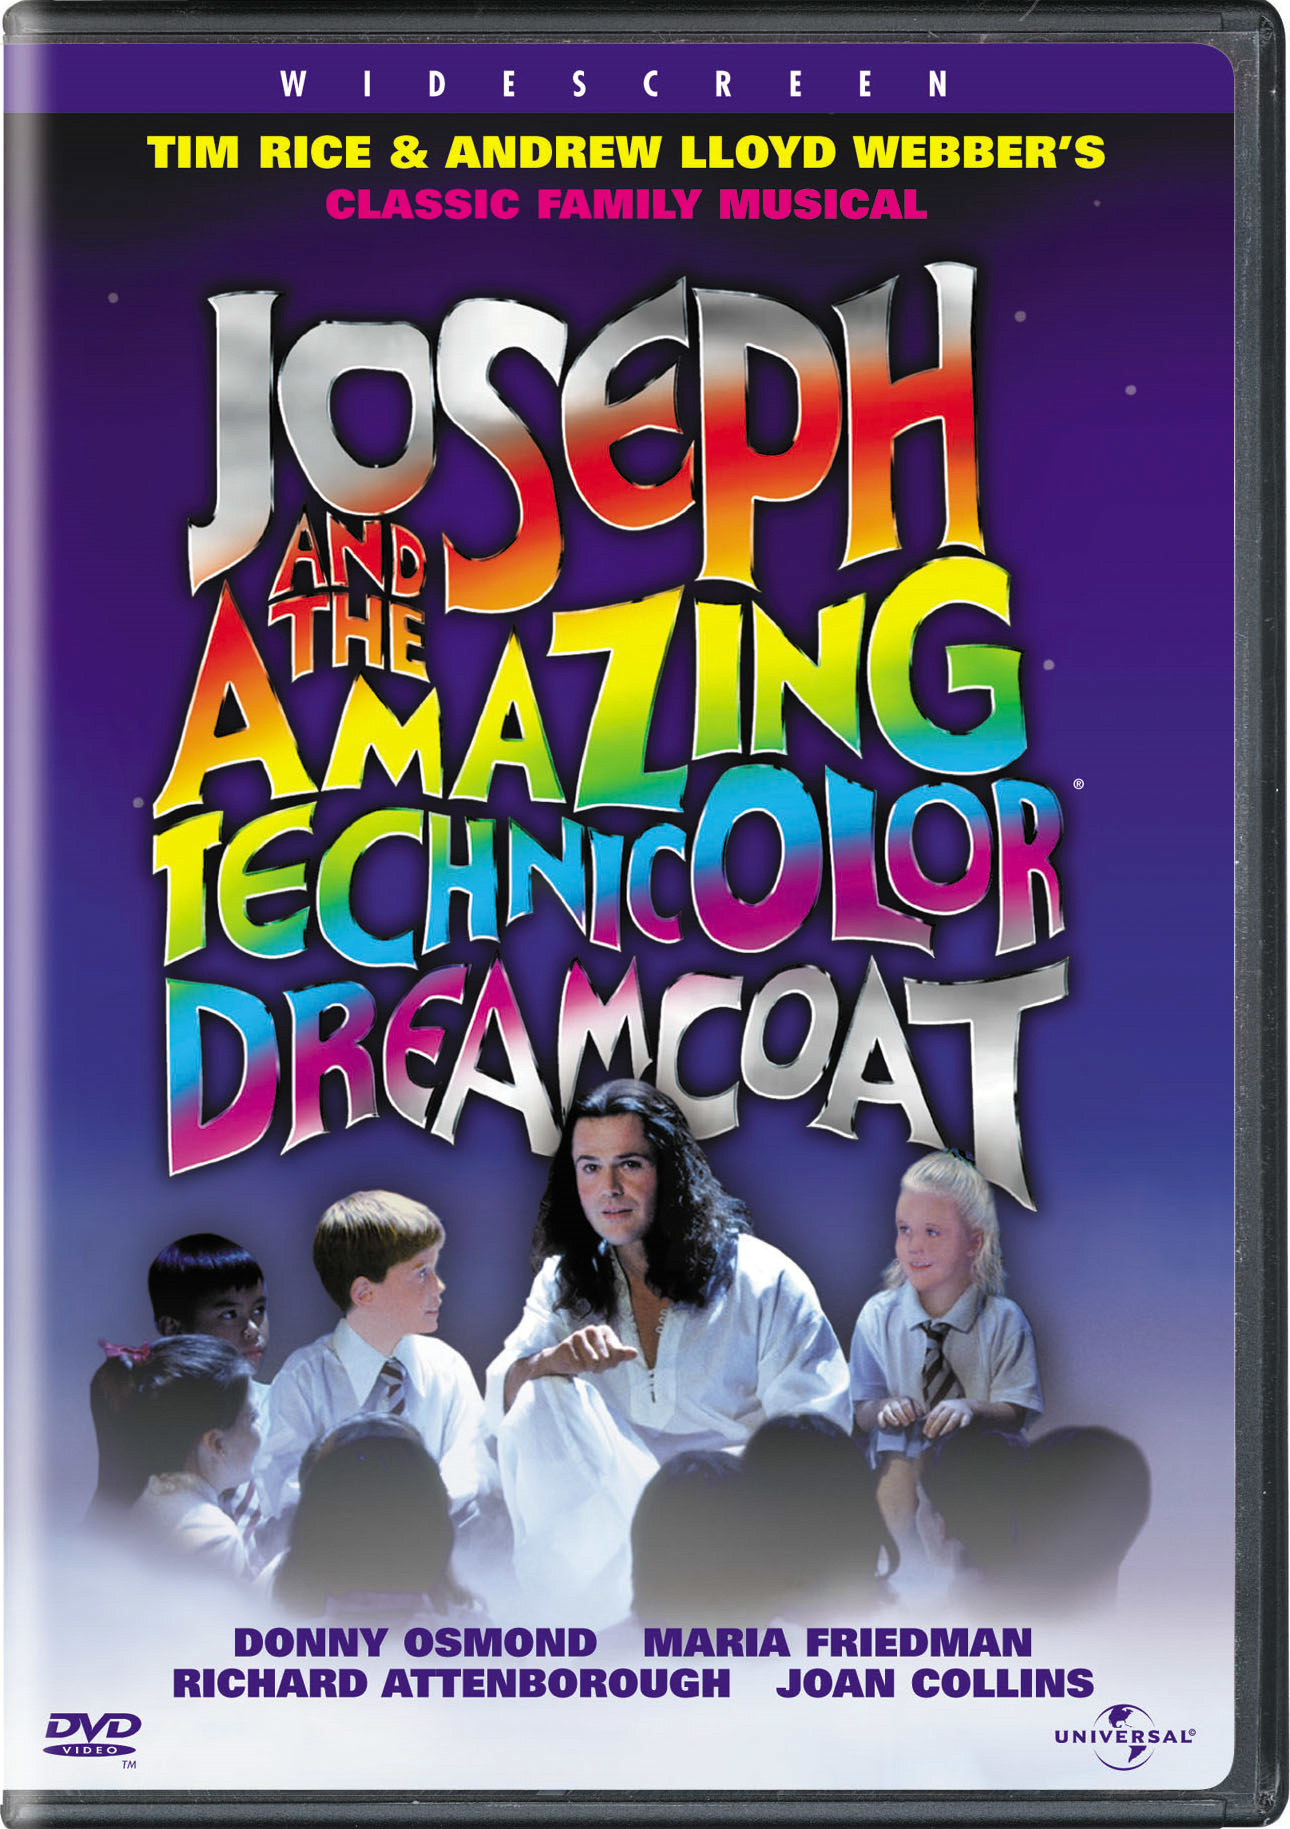 Joseph And The Amazing Technicolor Dreamcoat - DVD [ 1999 ]  - Stage Musicals Music On DVD